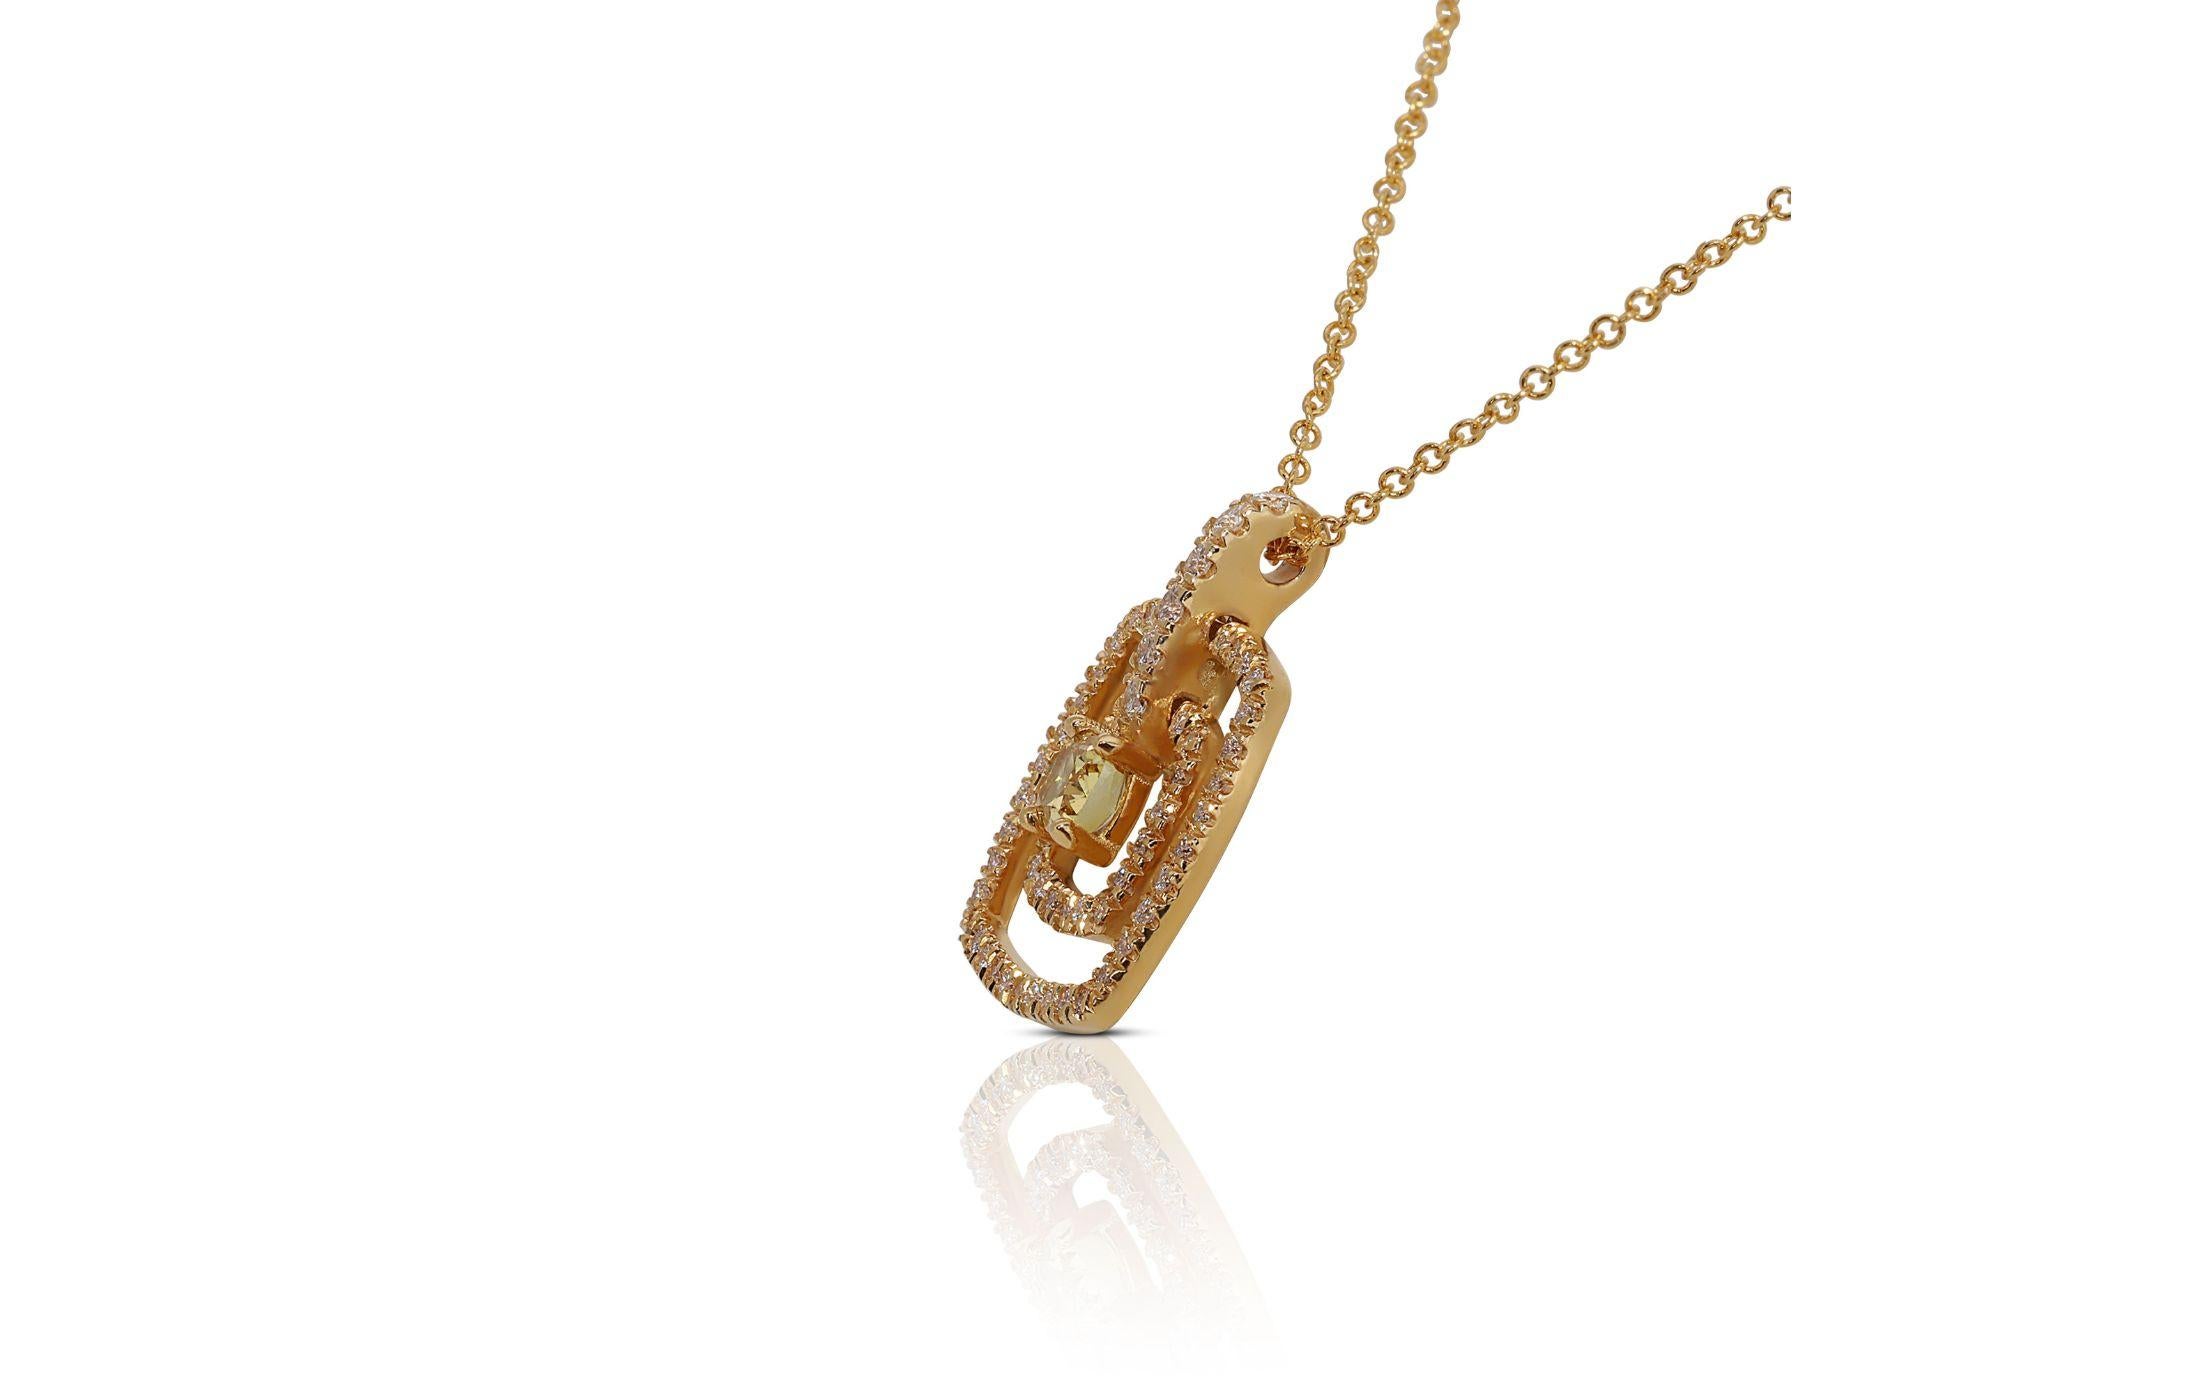 Intricate 0.68ct Diamond Necklace in 18K Yellow Gold In New Condition For Sale In רמת גן, IL